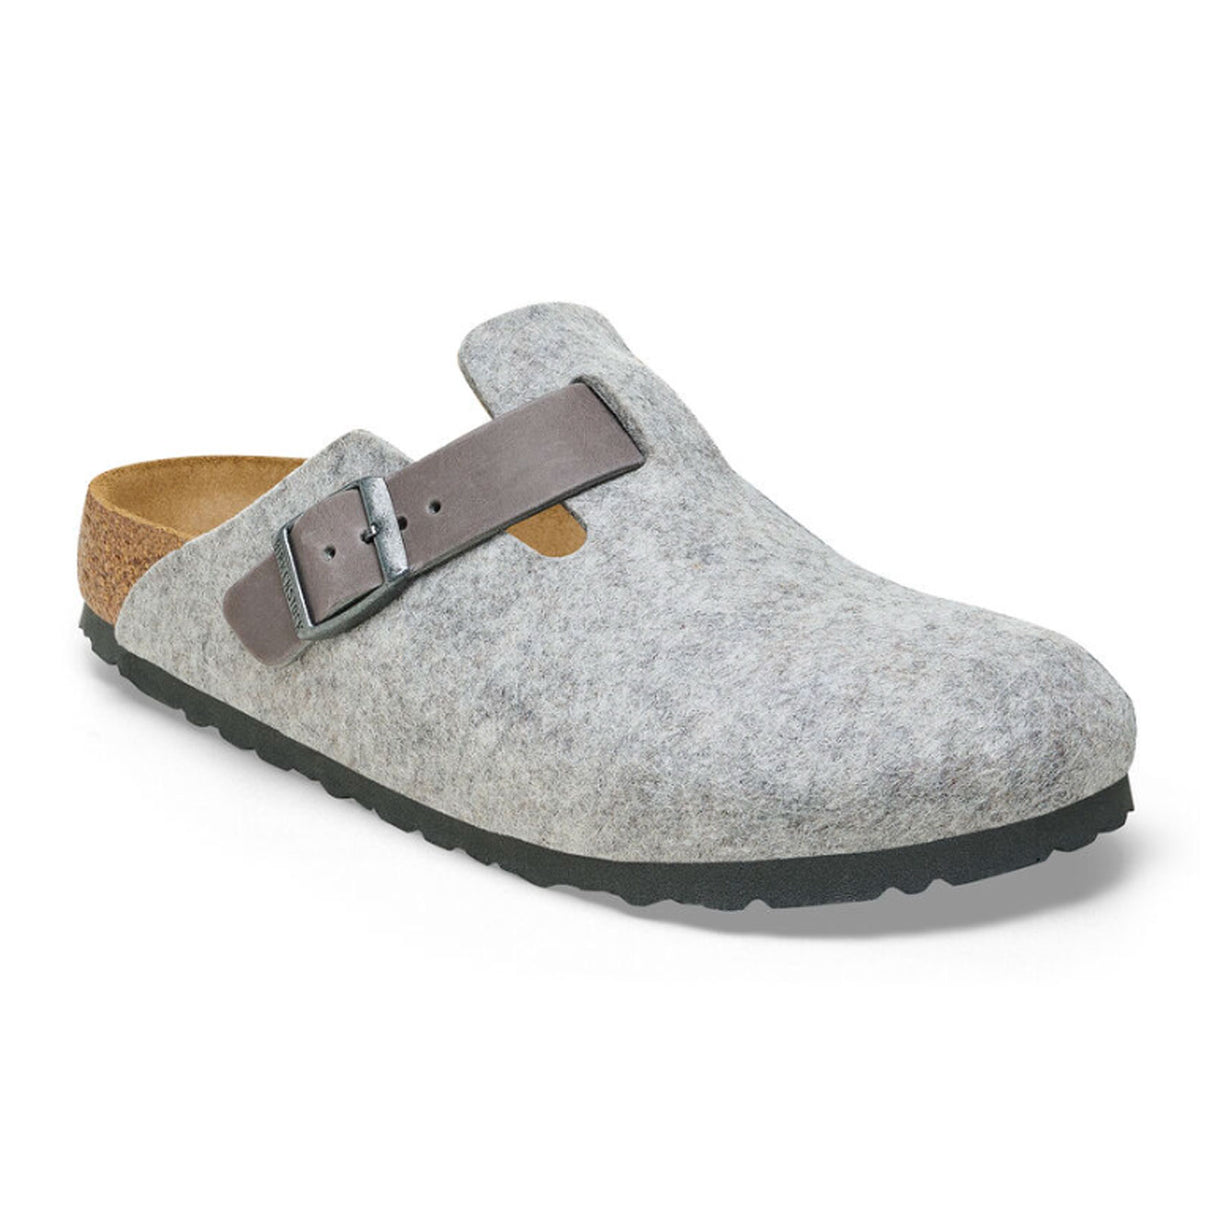 Birkenstock Boston Clog (Men) - Light Grey/Iron Wool/Oiled Leather Dress-Casual - Clogs & Mules - The Heel Shoe Fitters